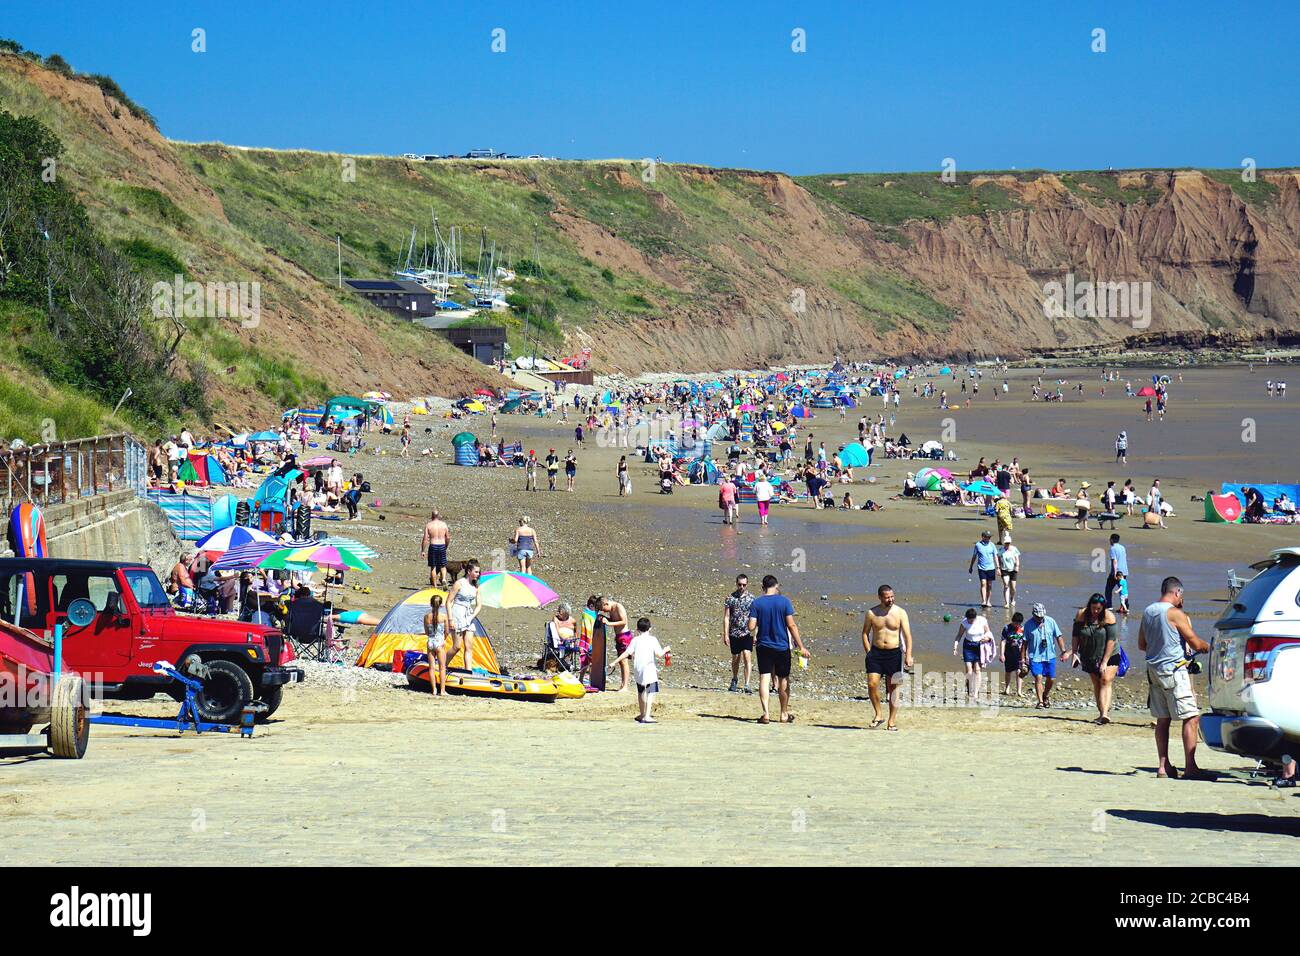 Filey, Yorkshire, UK. August 07, 2020.  Families of holidaymakers after the Corvid-19 lockdown enjoying the beach on Coble landing at Filey in Yorkshi Stock Photo